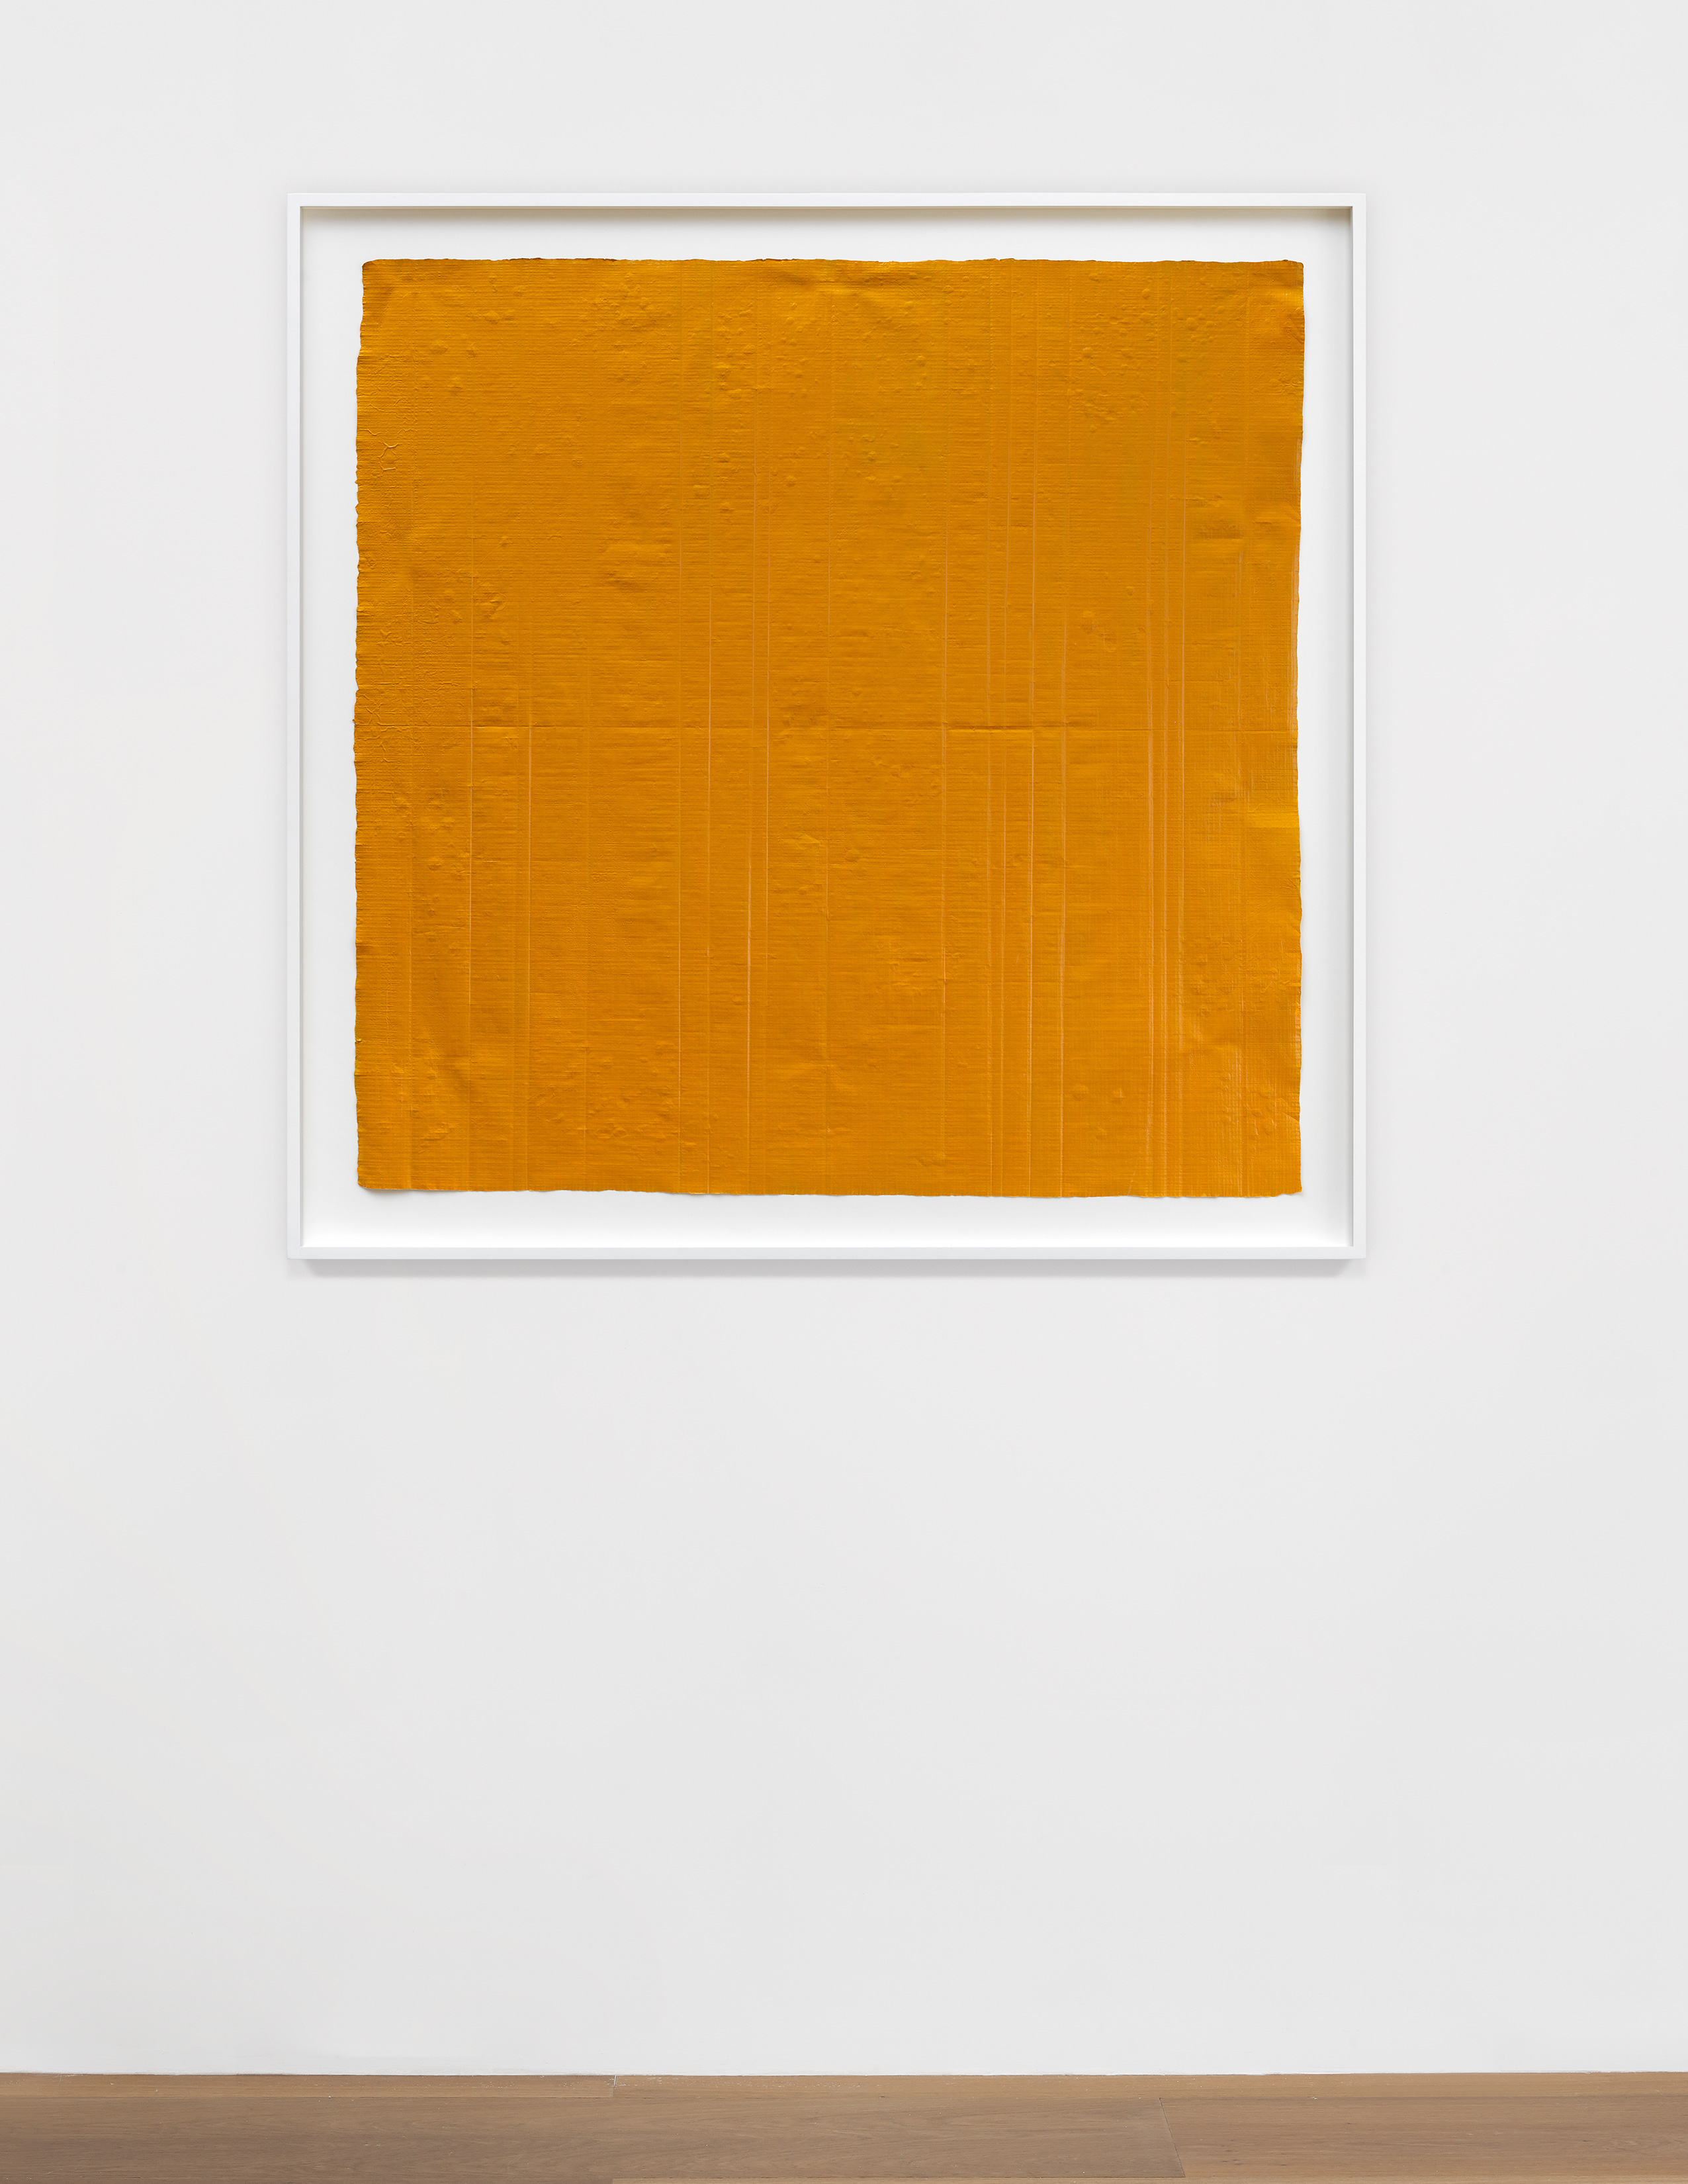 Installation view of Eleanore Mikus's Untitled paint on folded abaca paper work